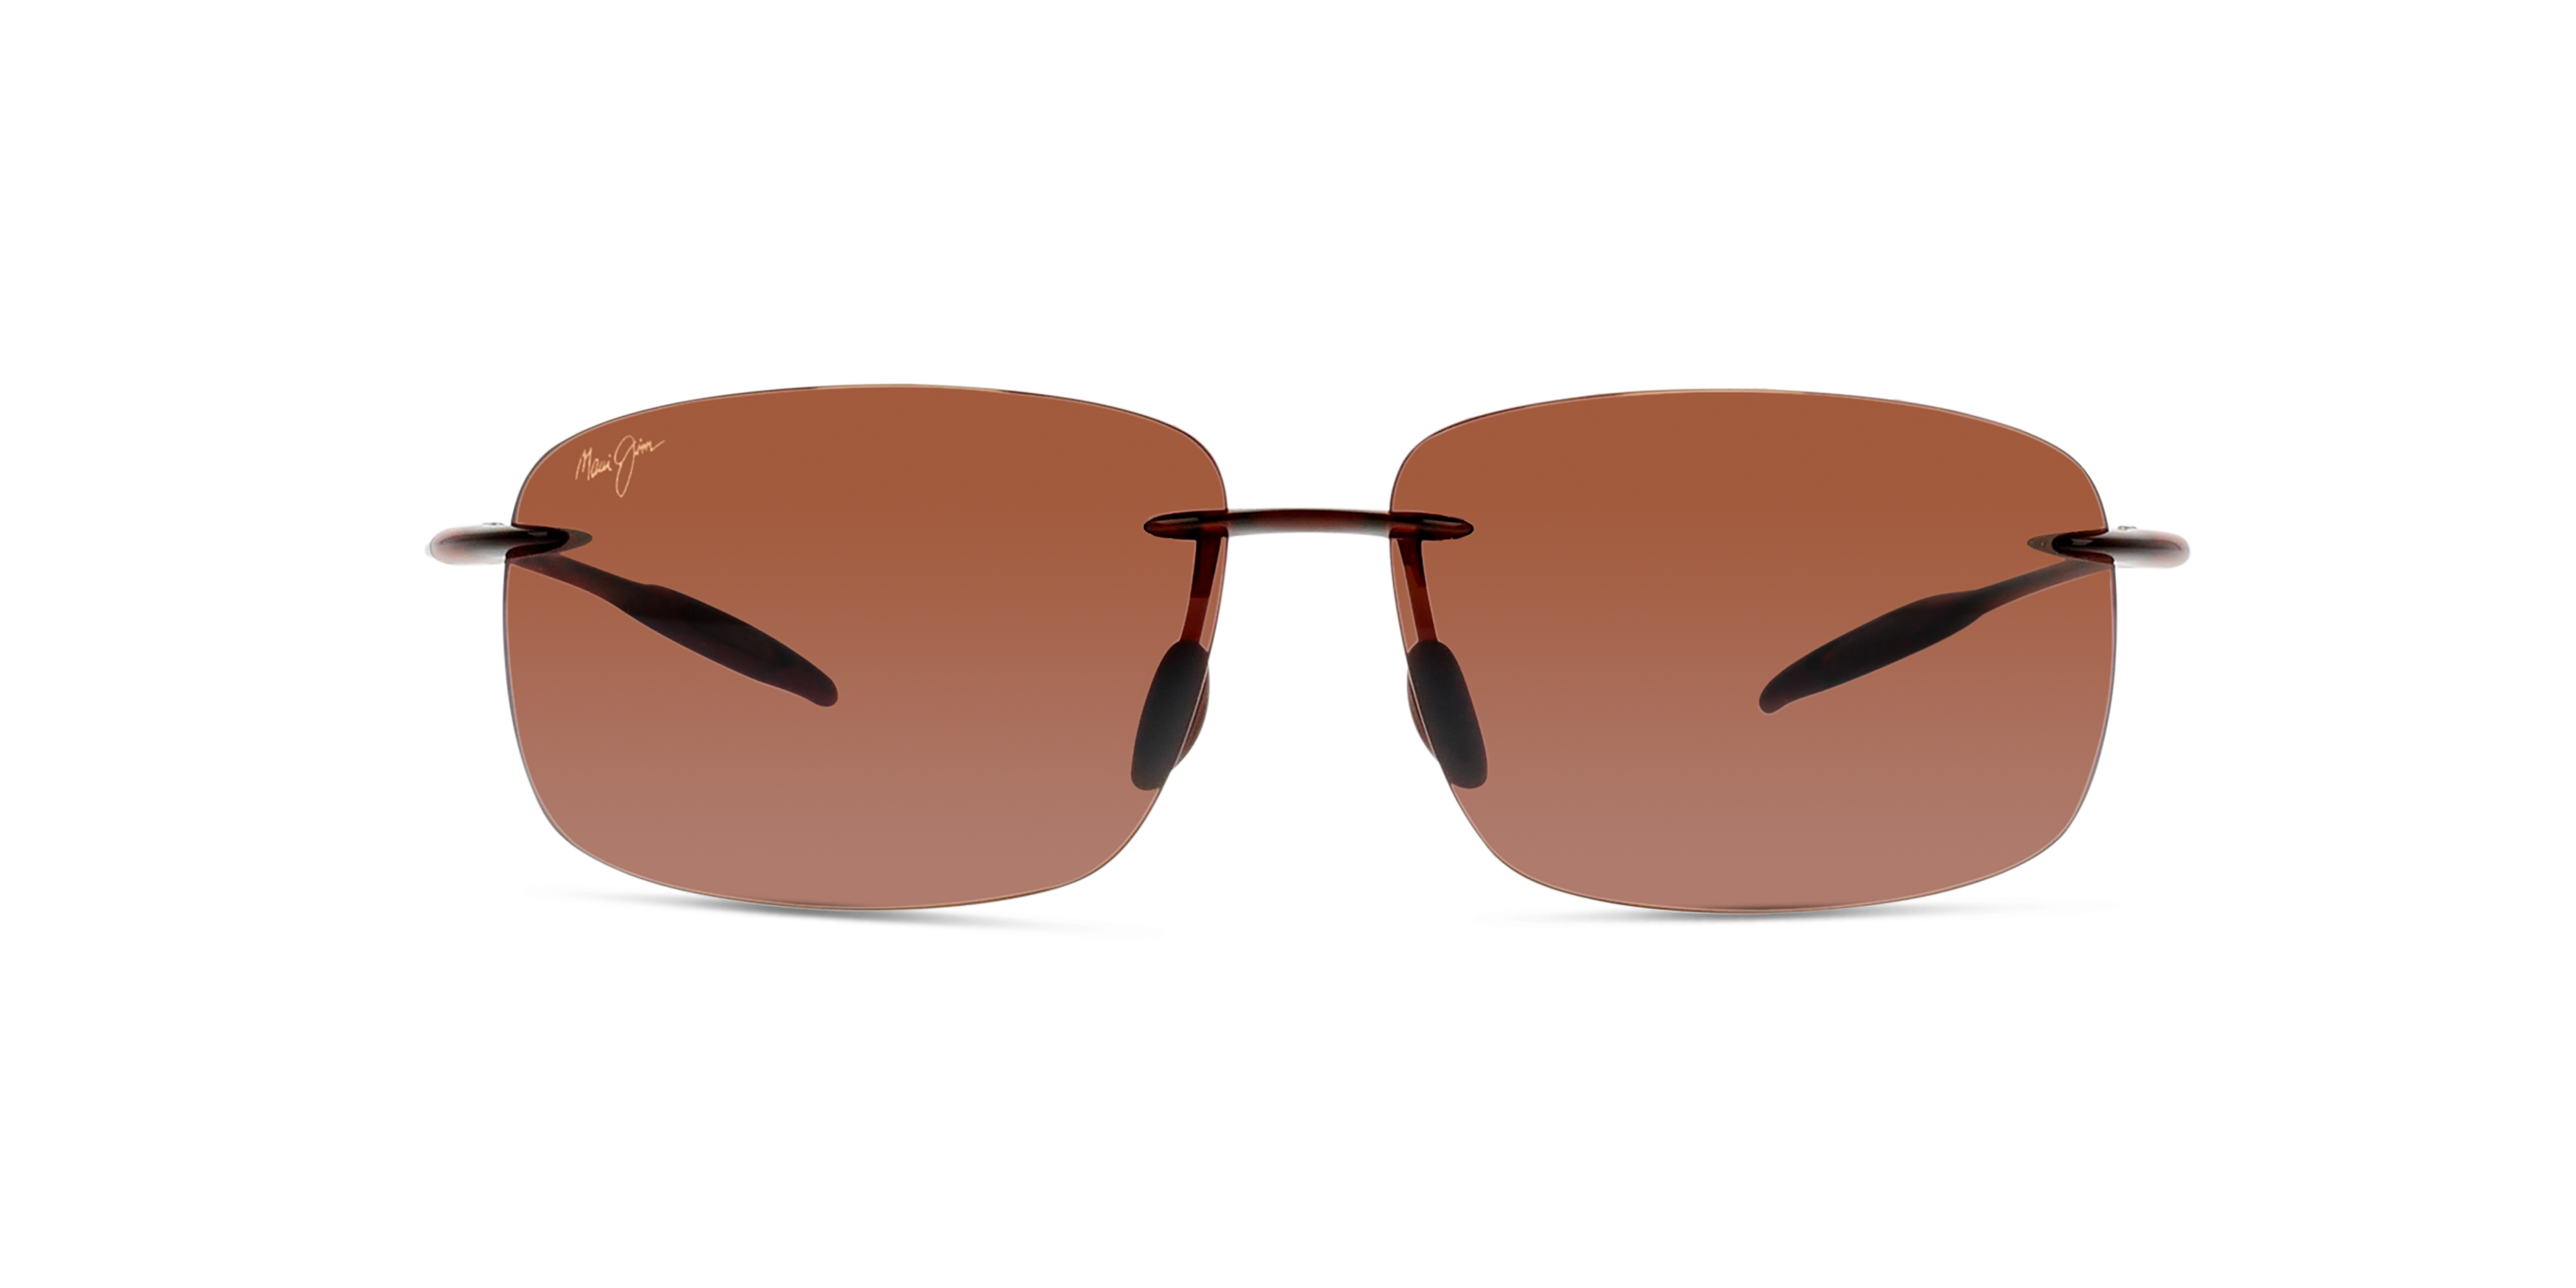 [products.image.front] MAUI JIM 422 Breakwall 26